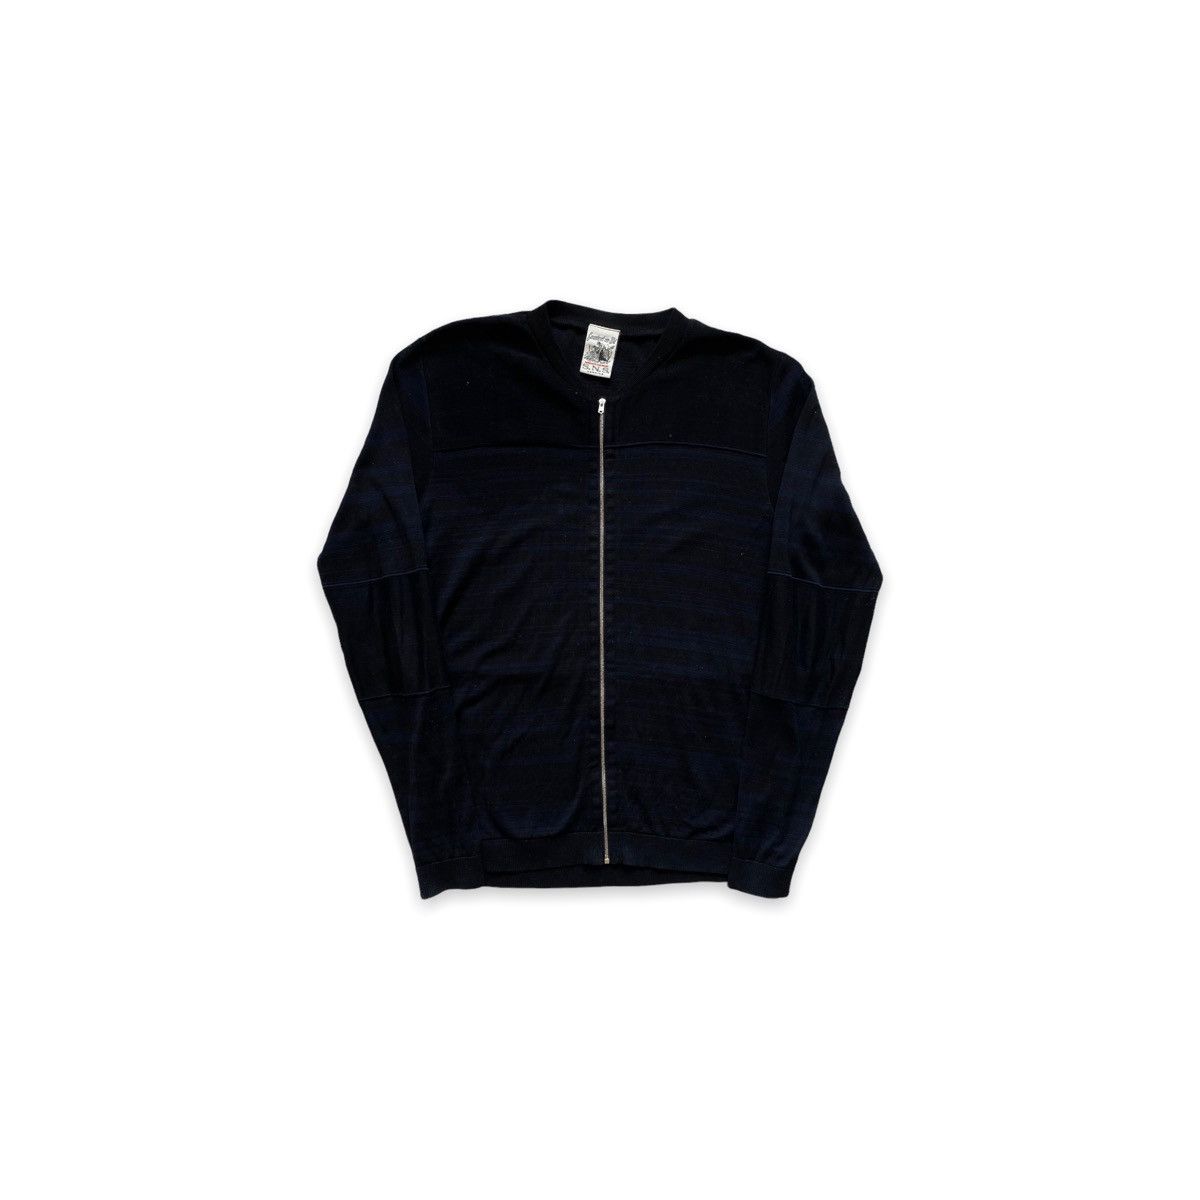 S.N.S. Herning S.N.S. Herning Knit Full Zip Sweater Size US L / EU 52-54 / 3 - 2 Preview